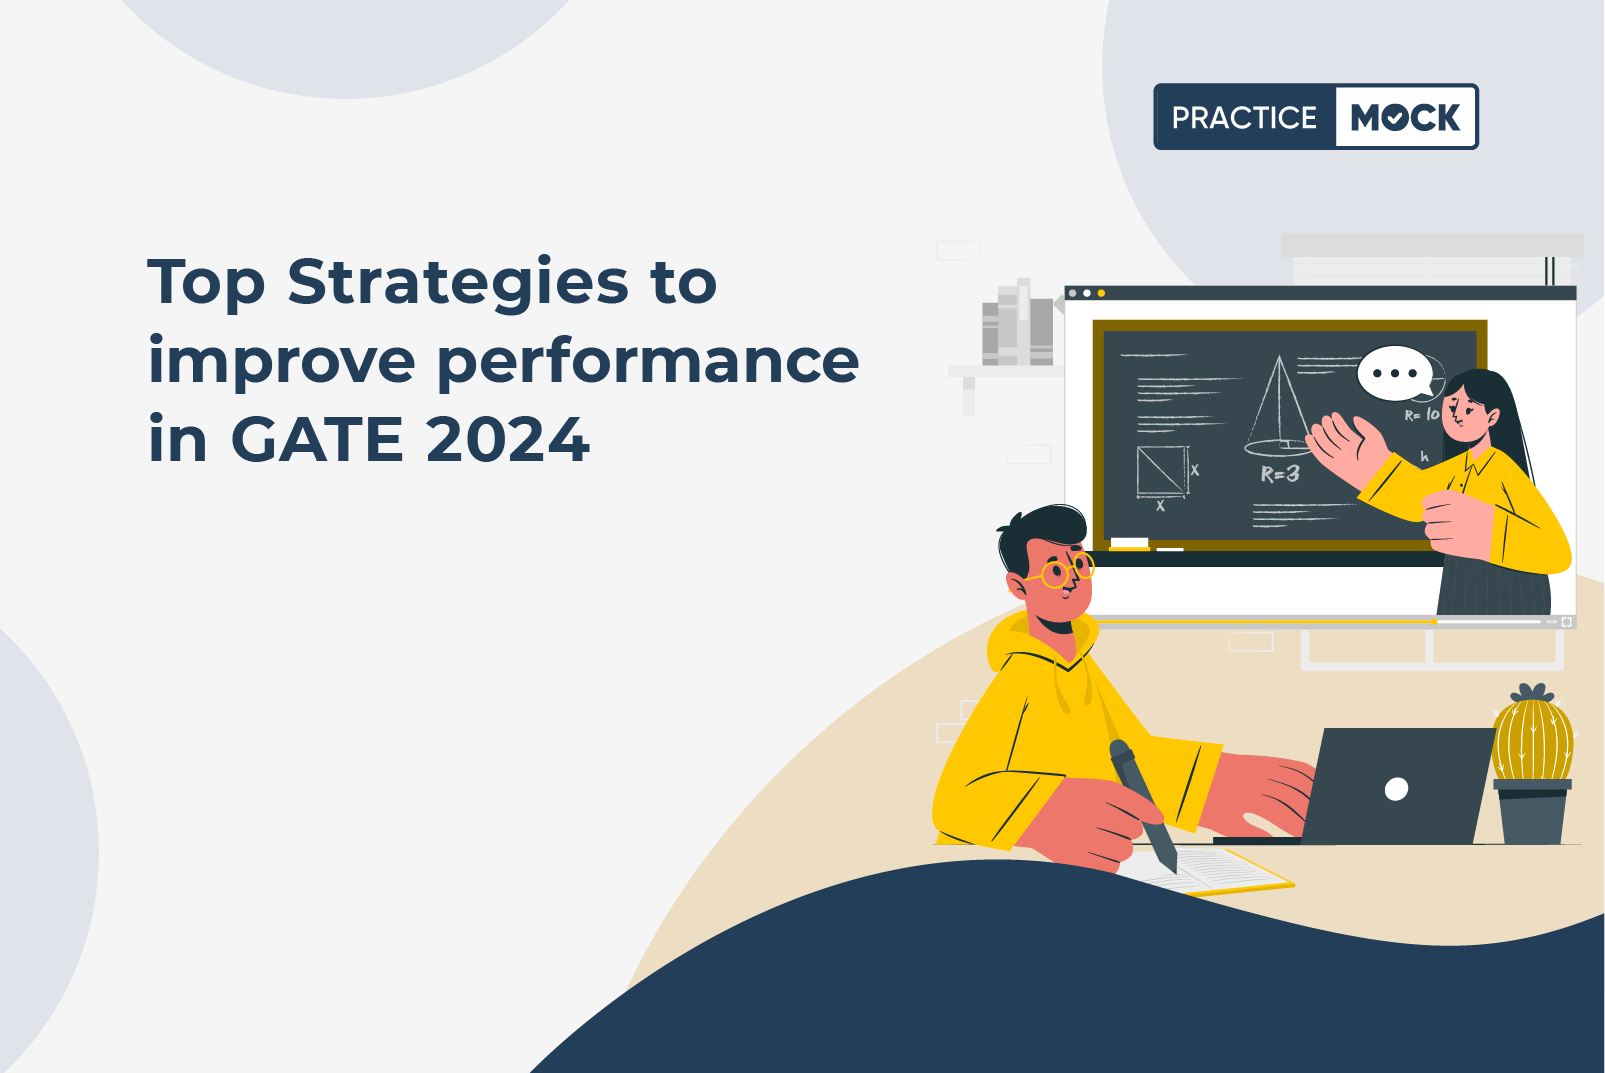 Top-Strategies-to-improve-performance-in-GATE-2024